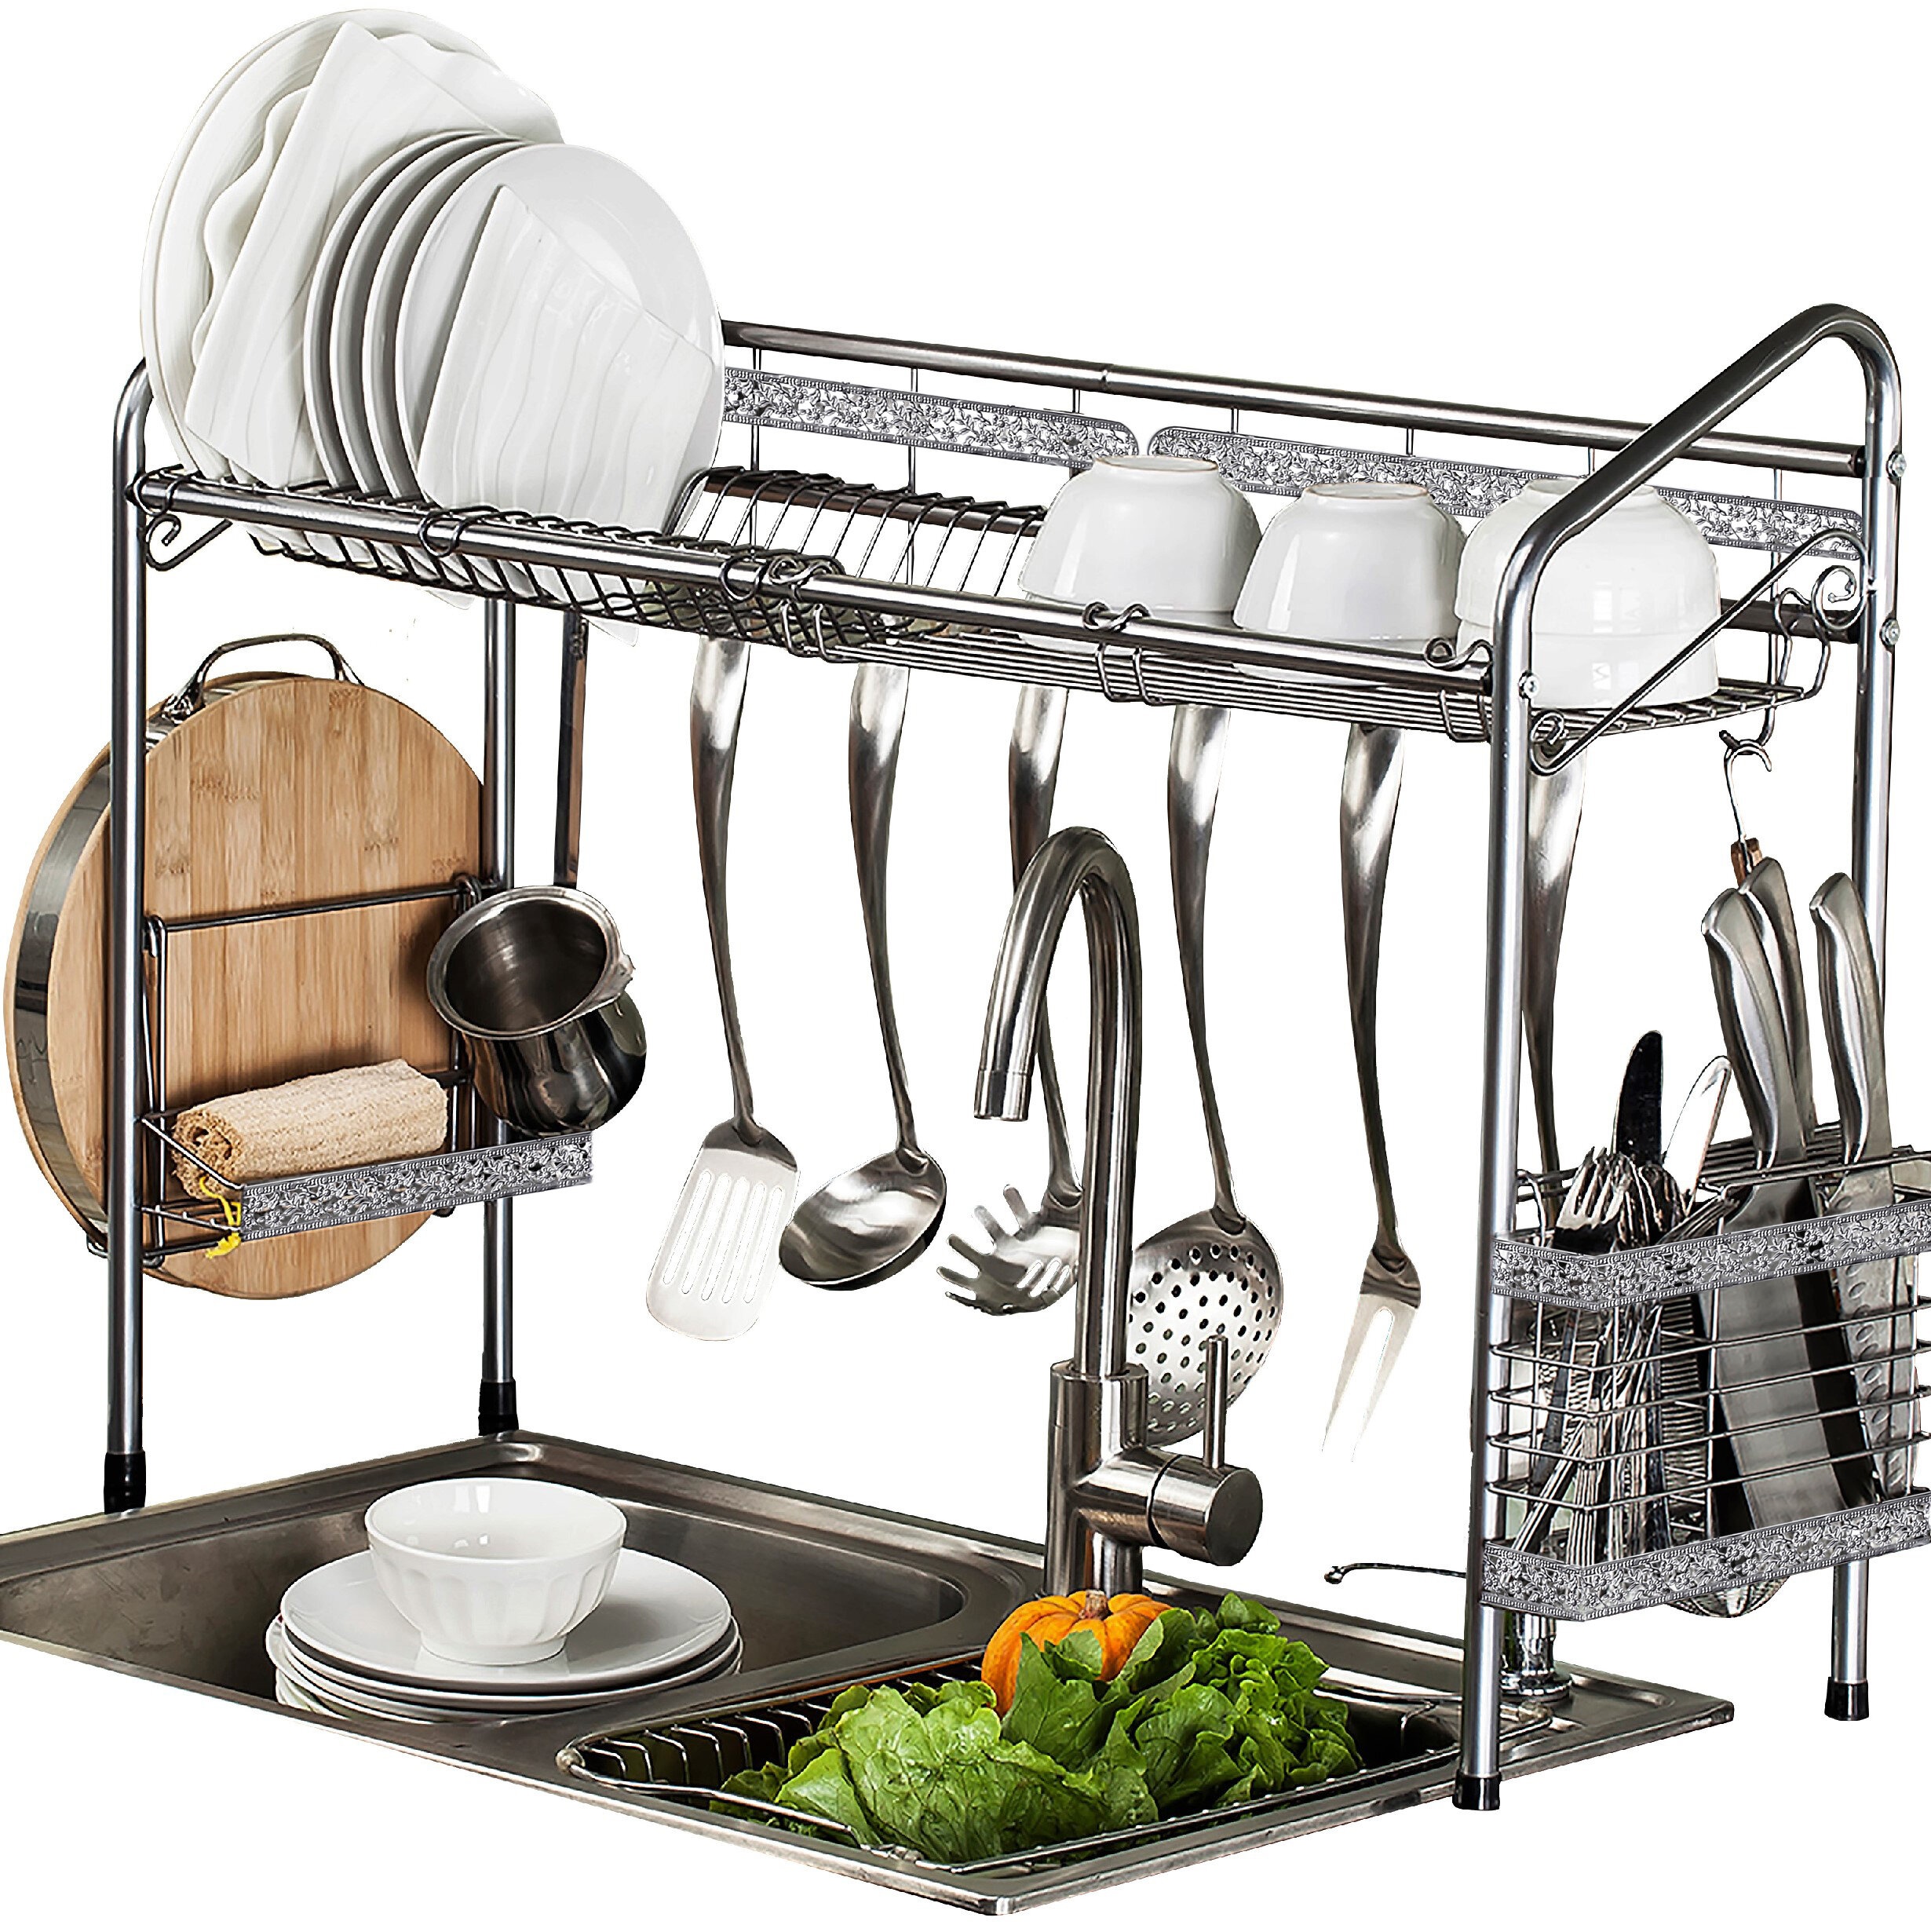 https://visualhunt.com/photos/23/professional-over-the-sink-stainless-steel-dish-rack-1.jpg